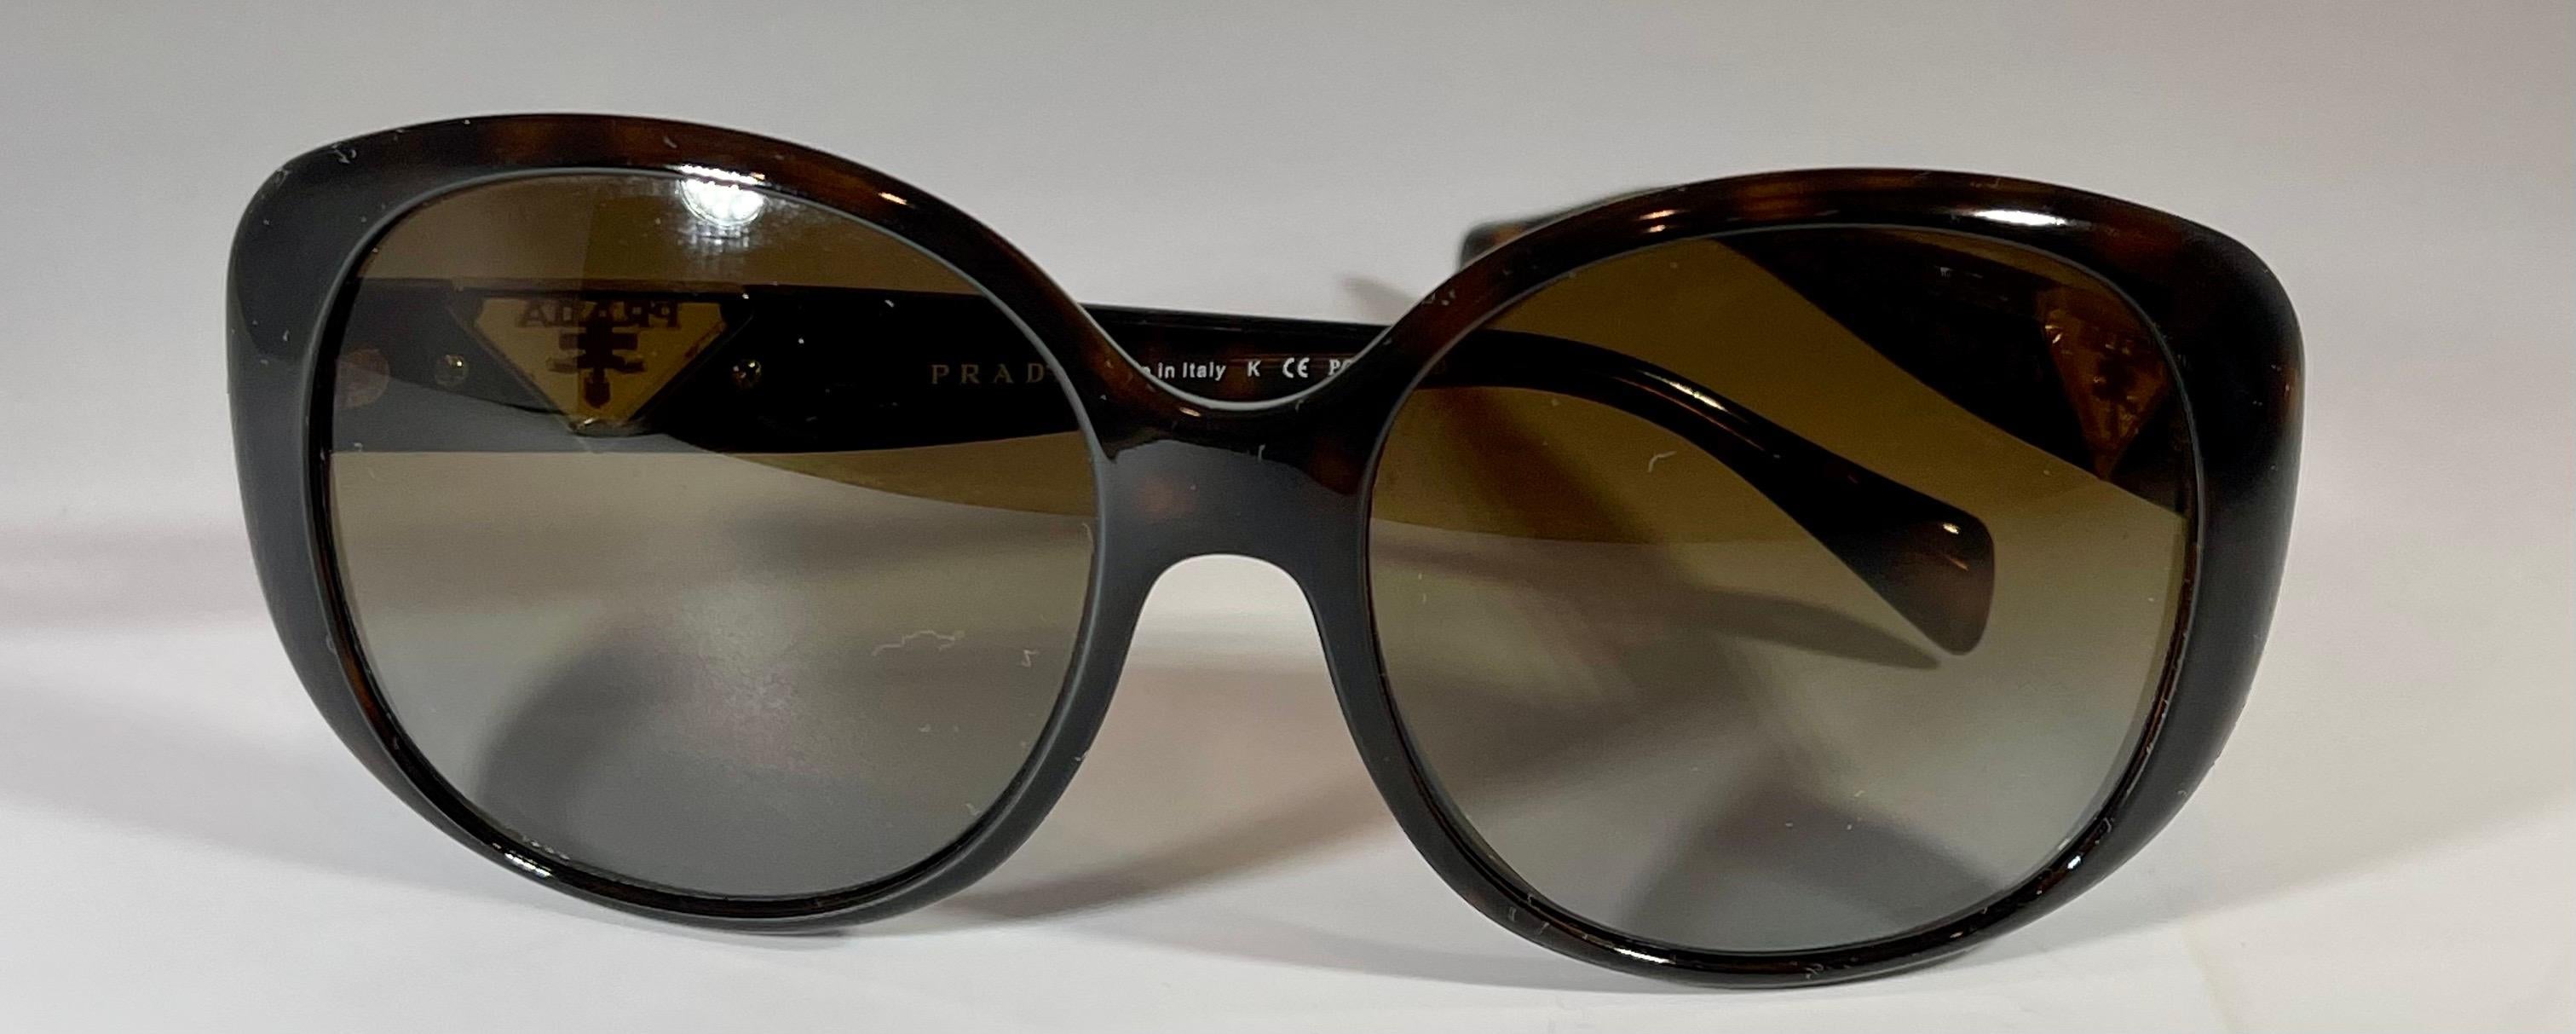 
Prada  15057 16 2AU-6E1 135 3P  Brown Women Sunglasses, Preloved Excellent, Polarized
Made in Italy
Brown Women Sunglasses, Medium to Large  size
Dark Brown shade of lenses
Pre Loved 
No box from Prada
all pictures of the original sunglass
Prada